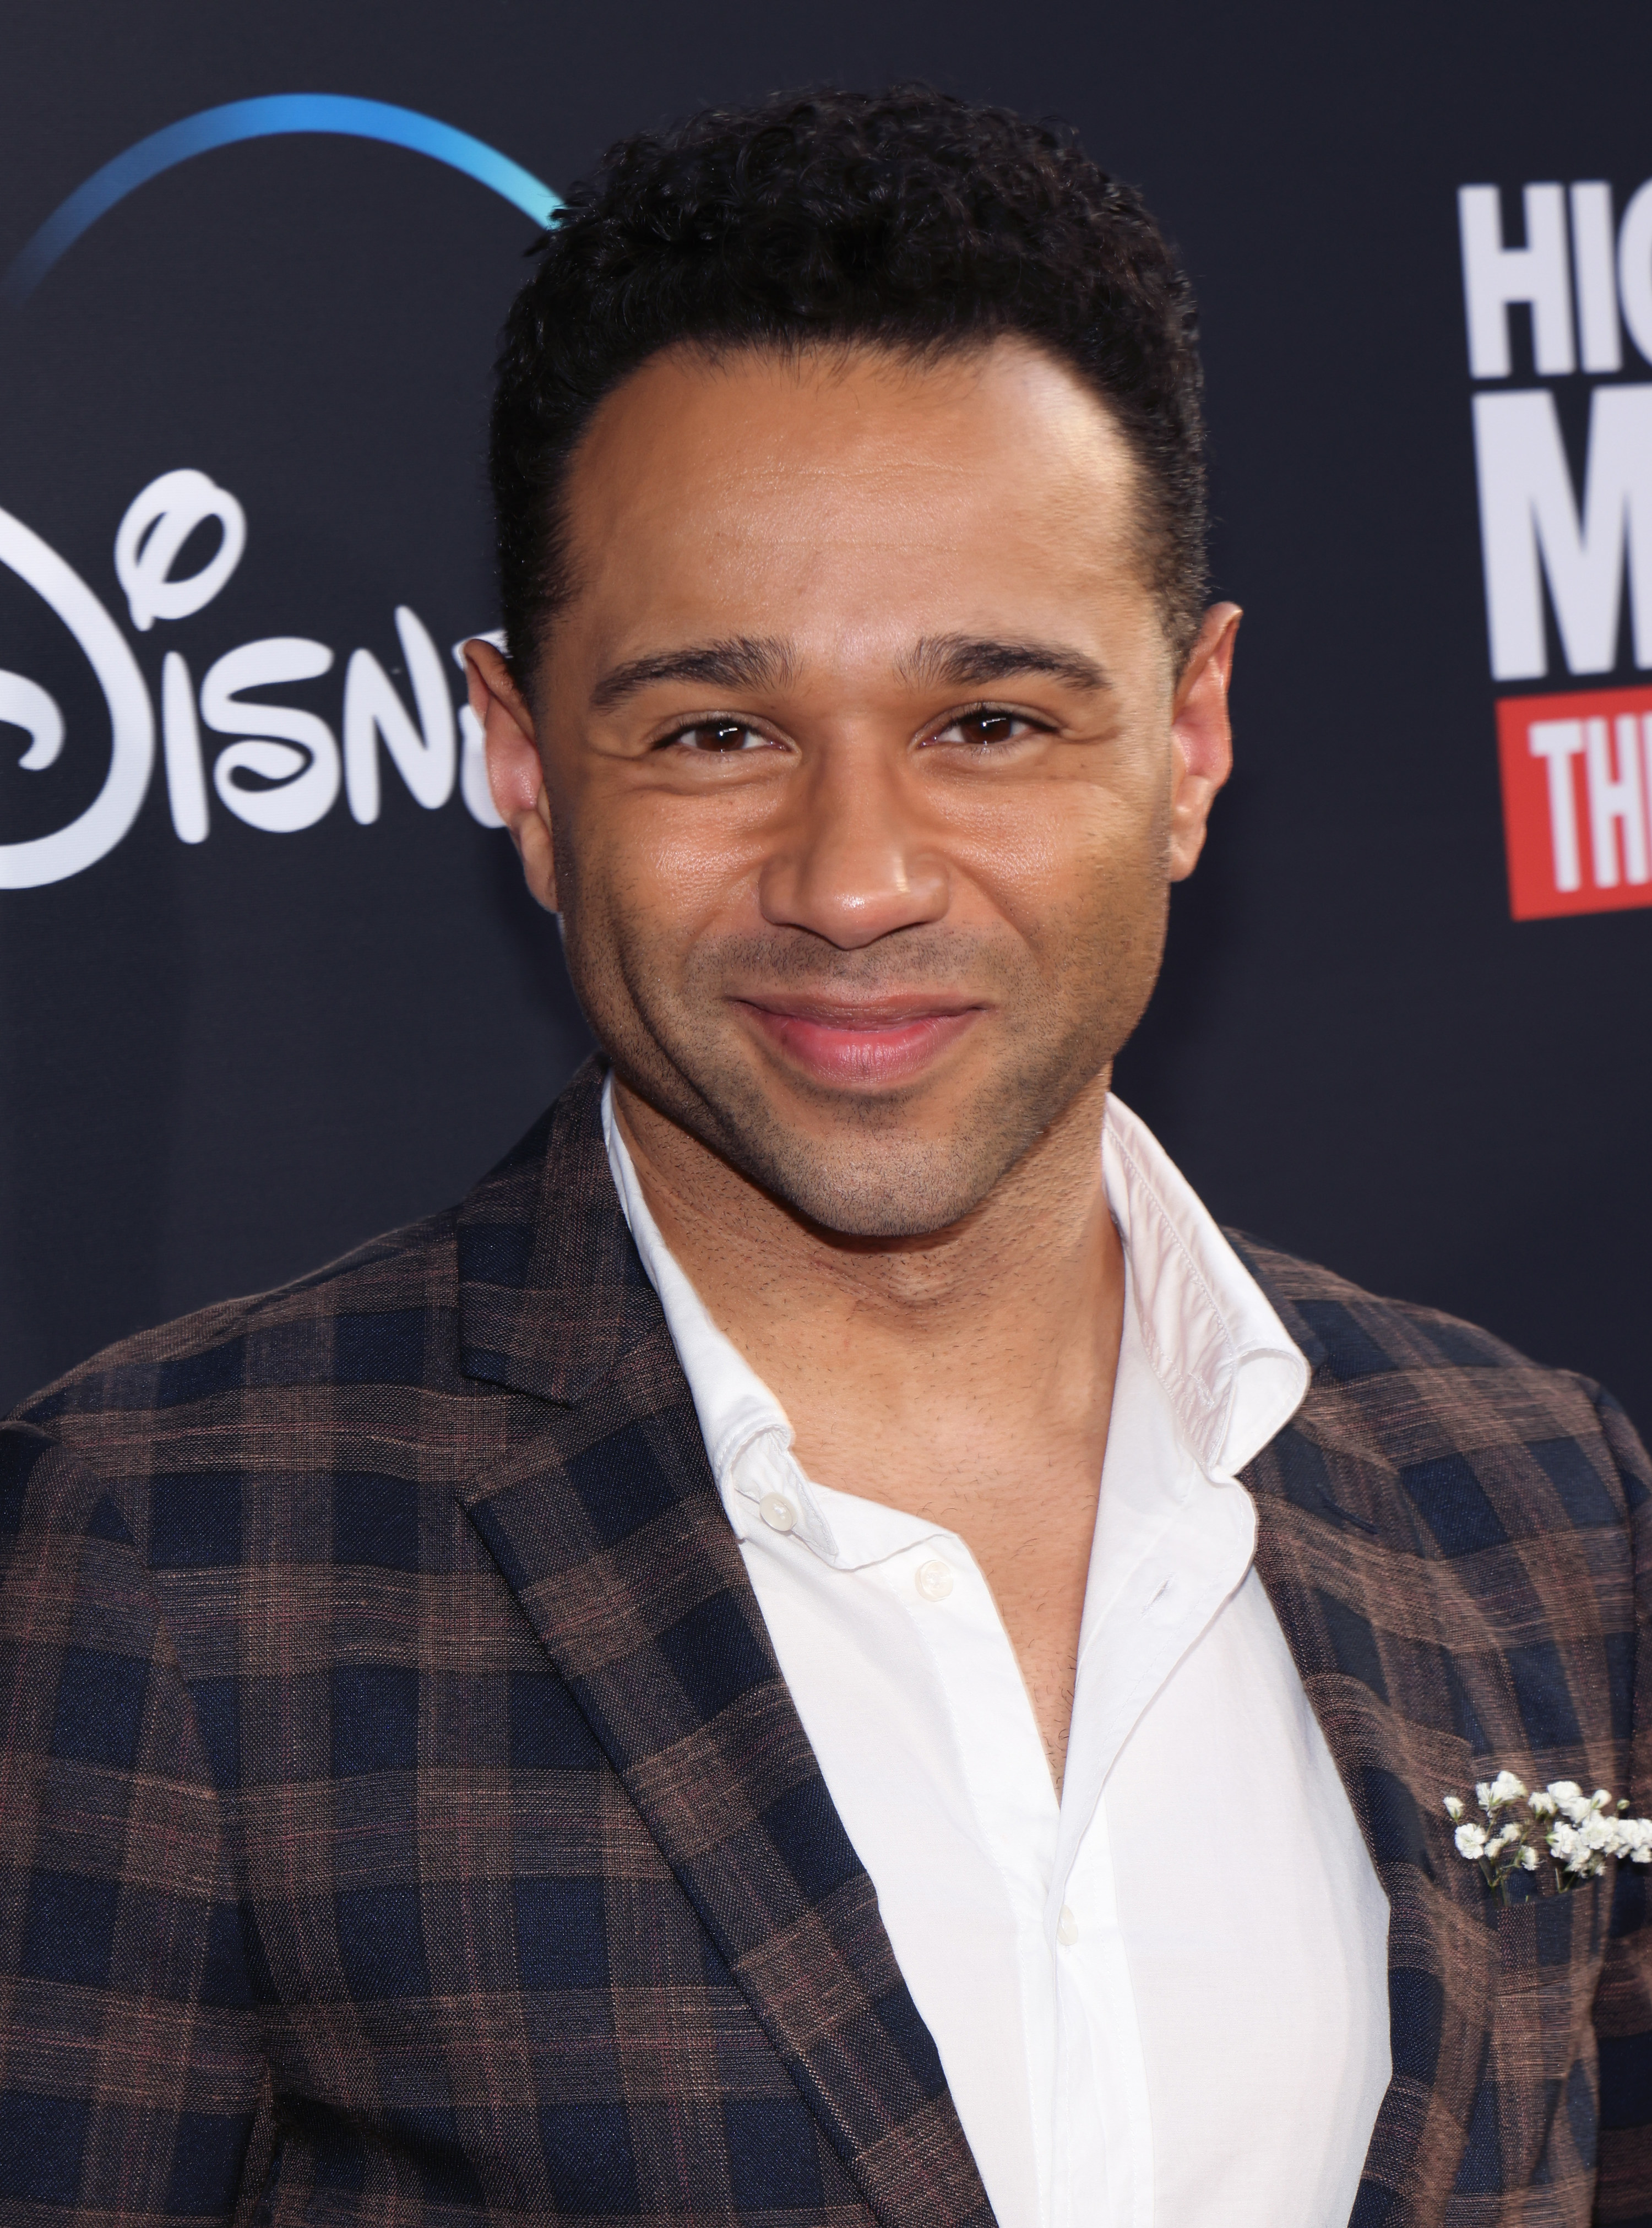 Corbin Bleu on the red carpet at the High School Musical: The Musical: The Series premiere